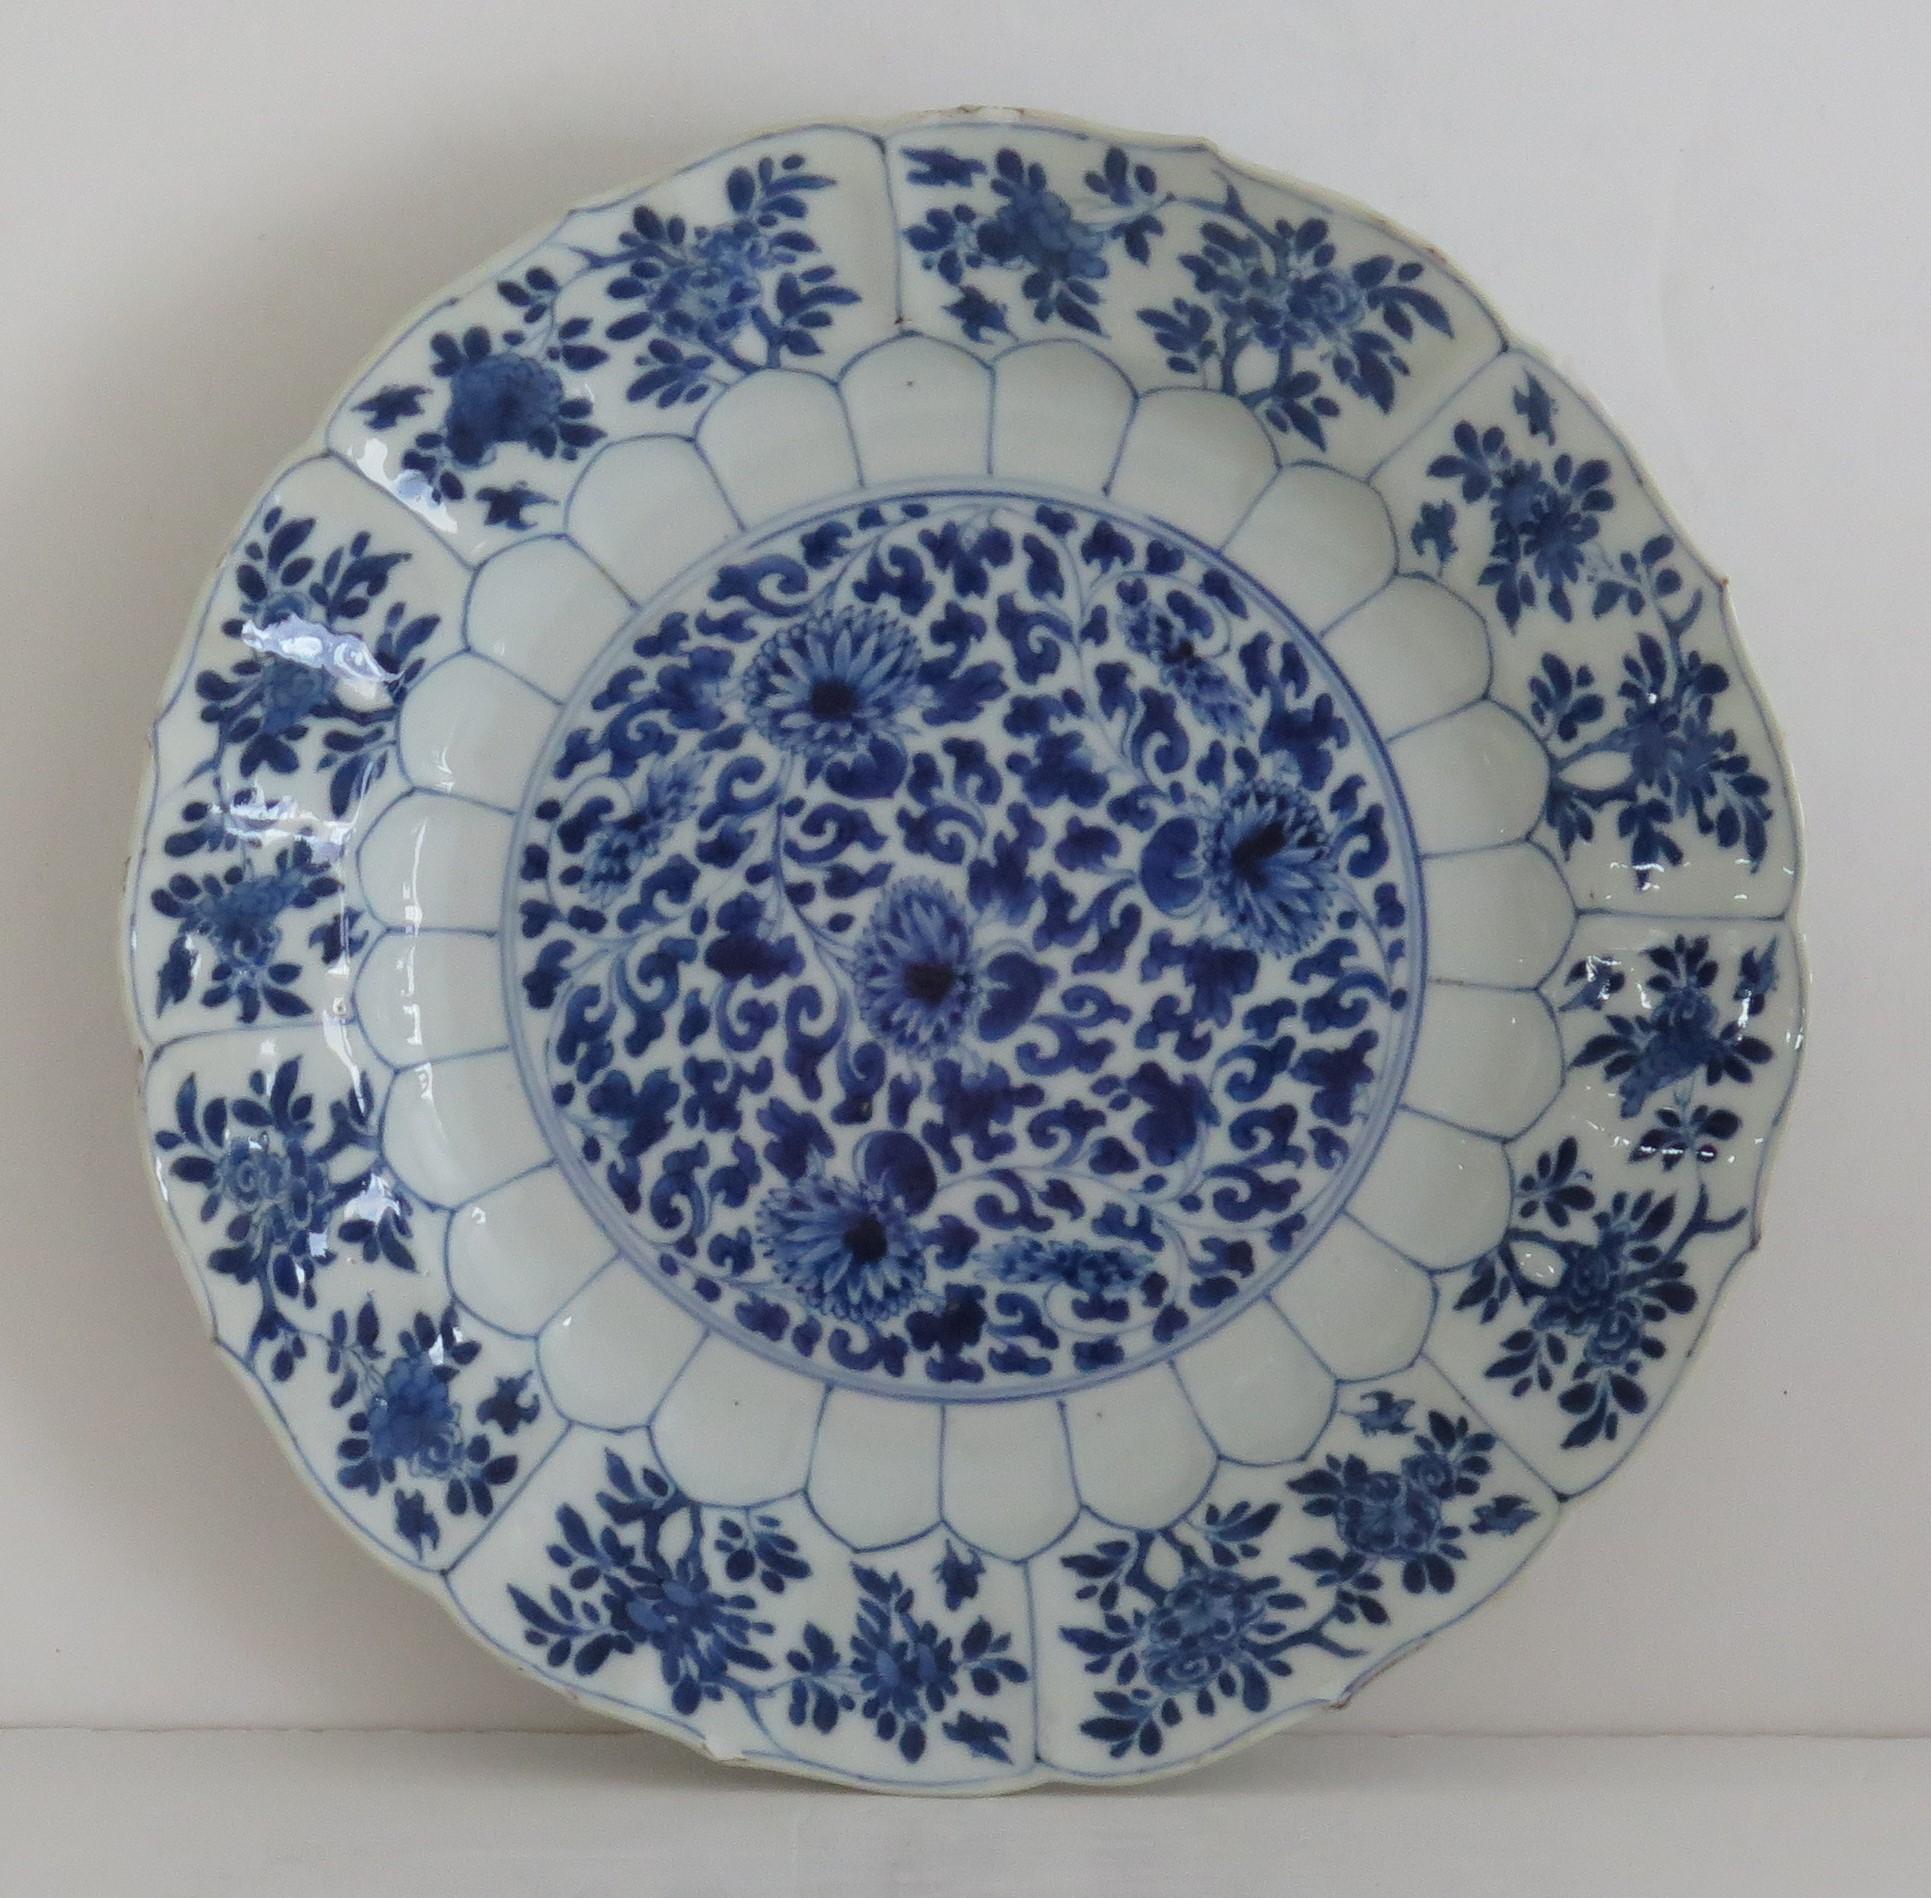 This is a very beautiful hand painted blue and white Chinese porcelain deep plate or dish, dating to the second half of the 17th century, circa 1675, Qing dynasty, the early part of reign of Kangxi ( 1662 to 1722) period.

The plate is very well